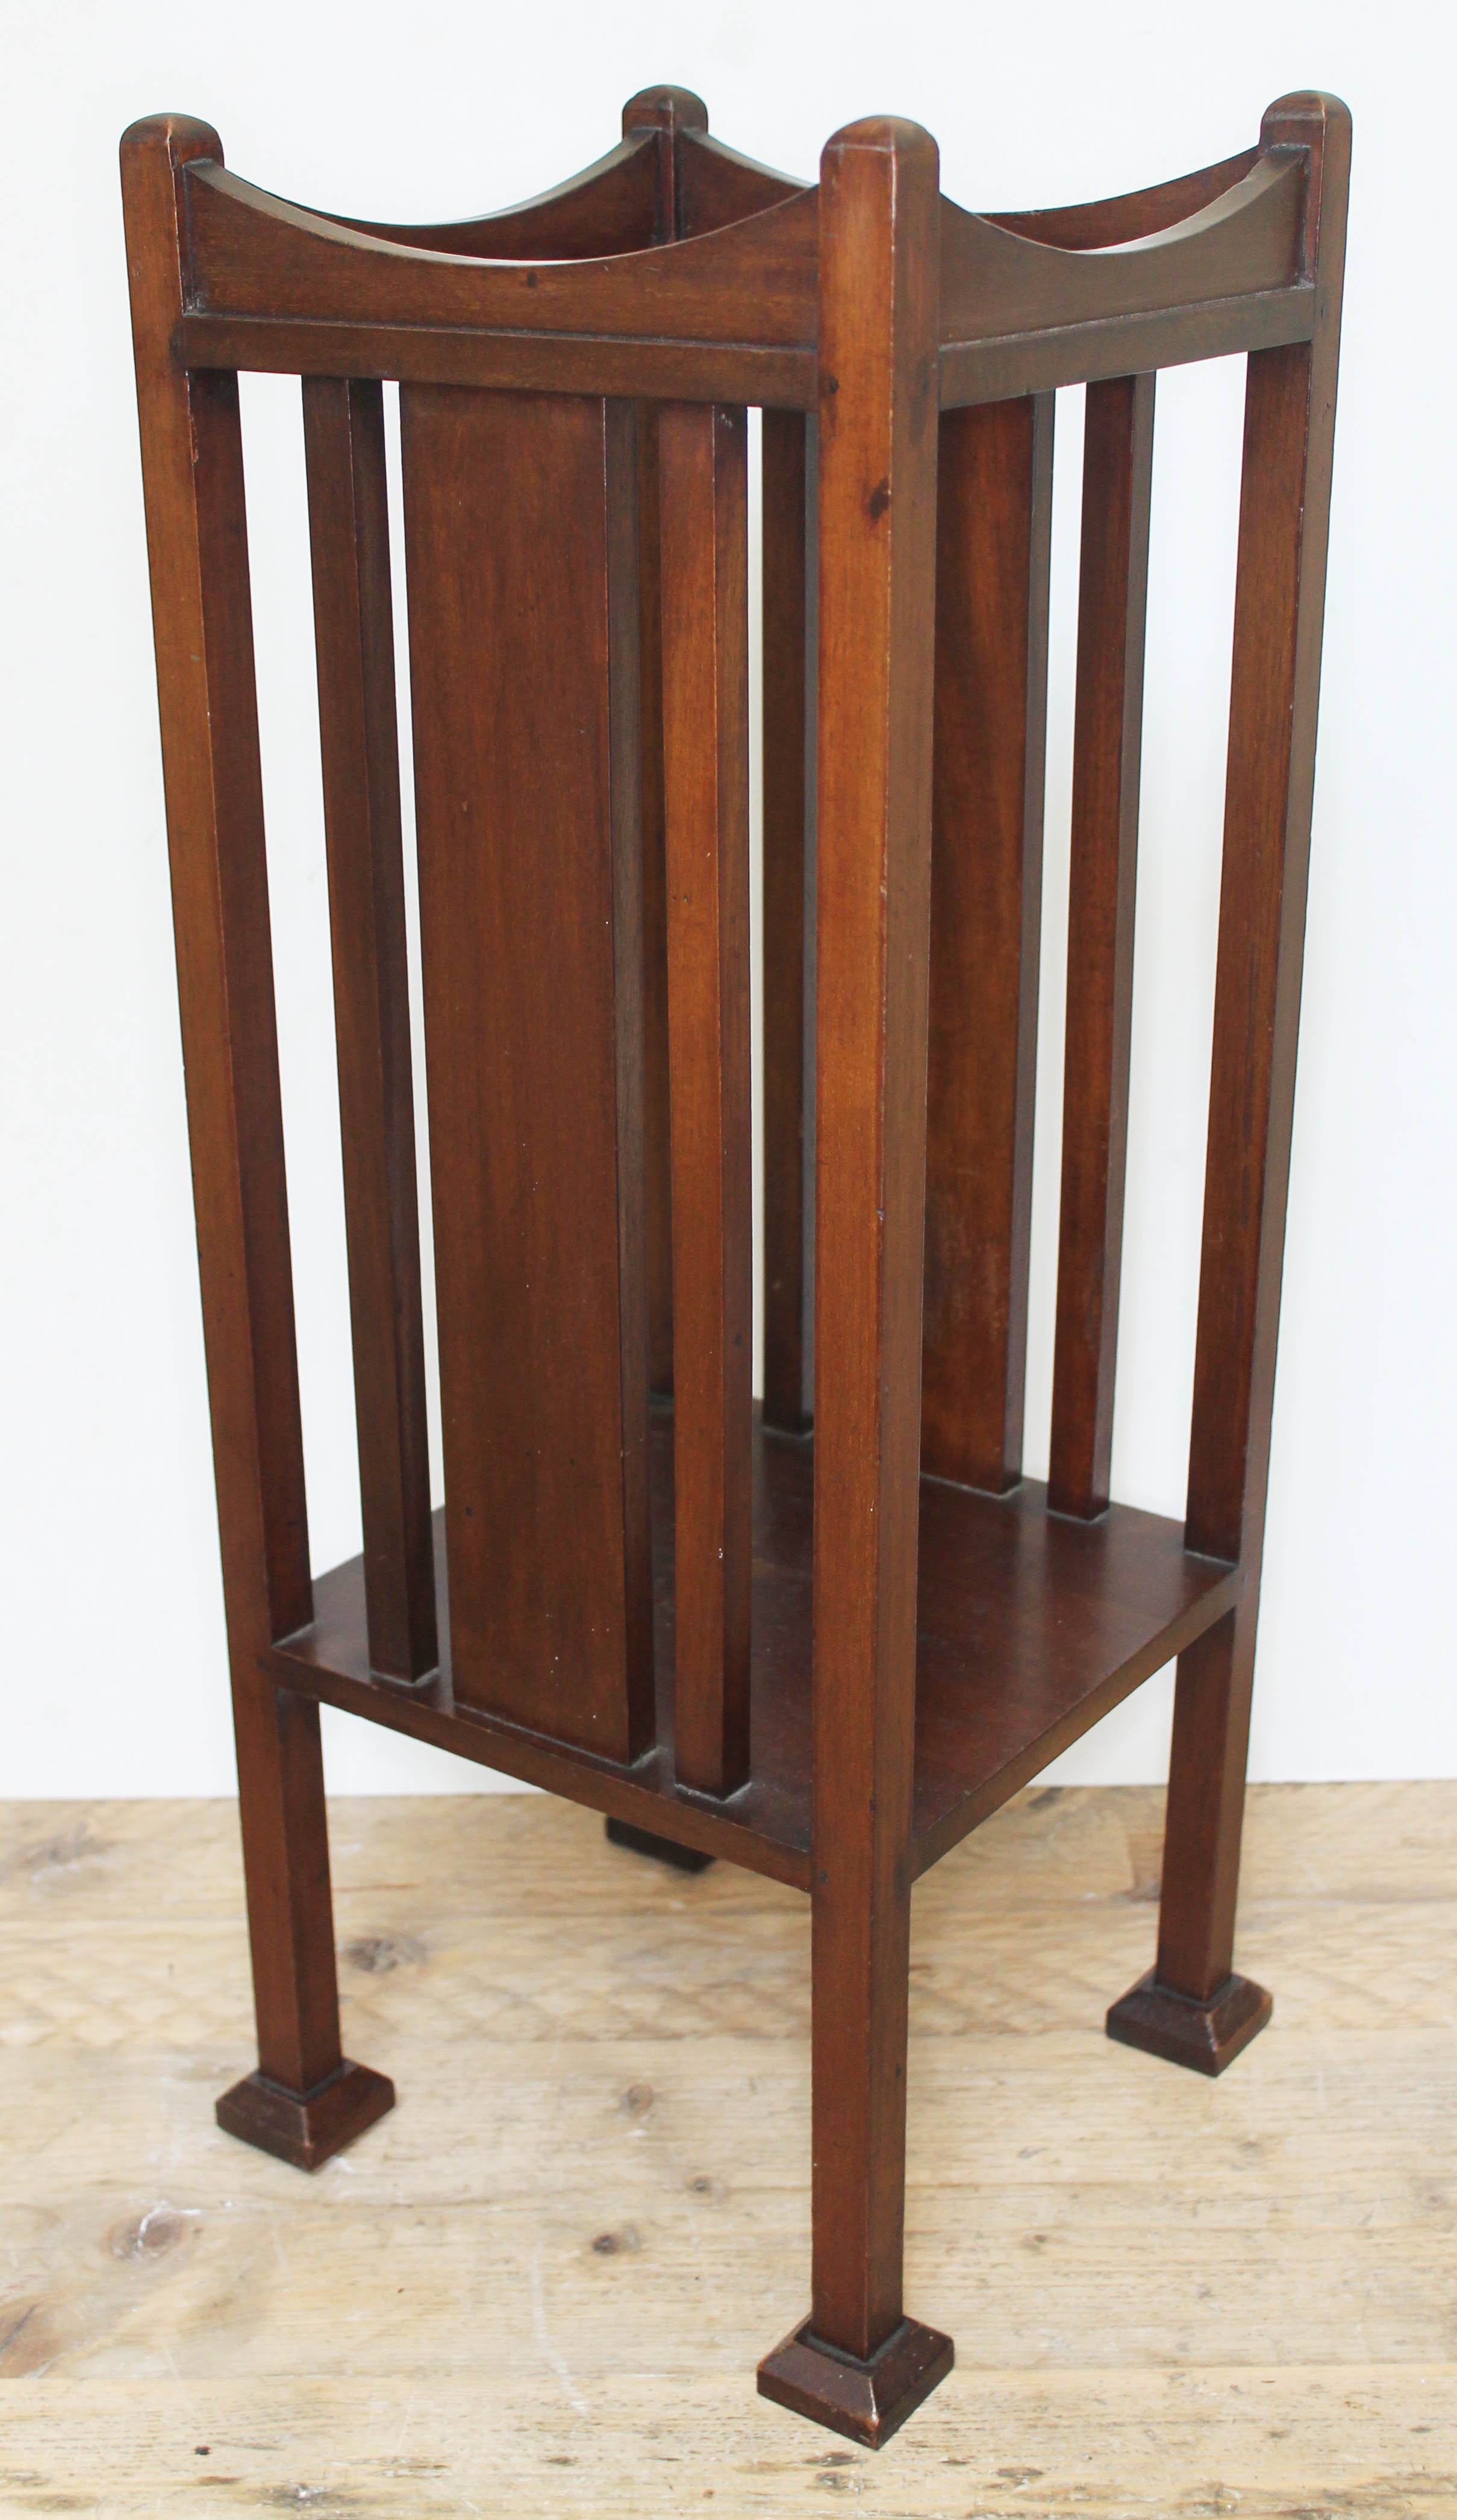 An Edwardian Arts & Crafts style mahogany plant stand with slatted sides, lower tier, on squared